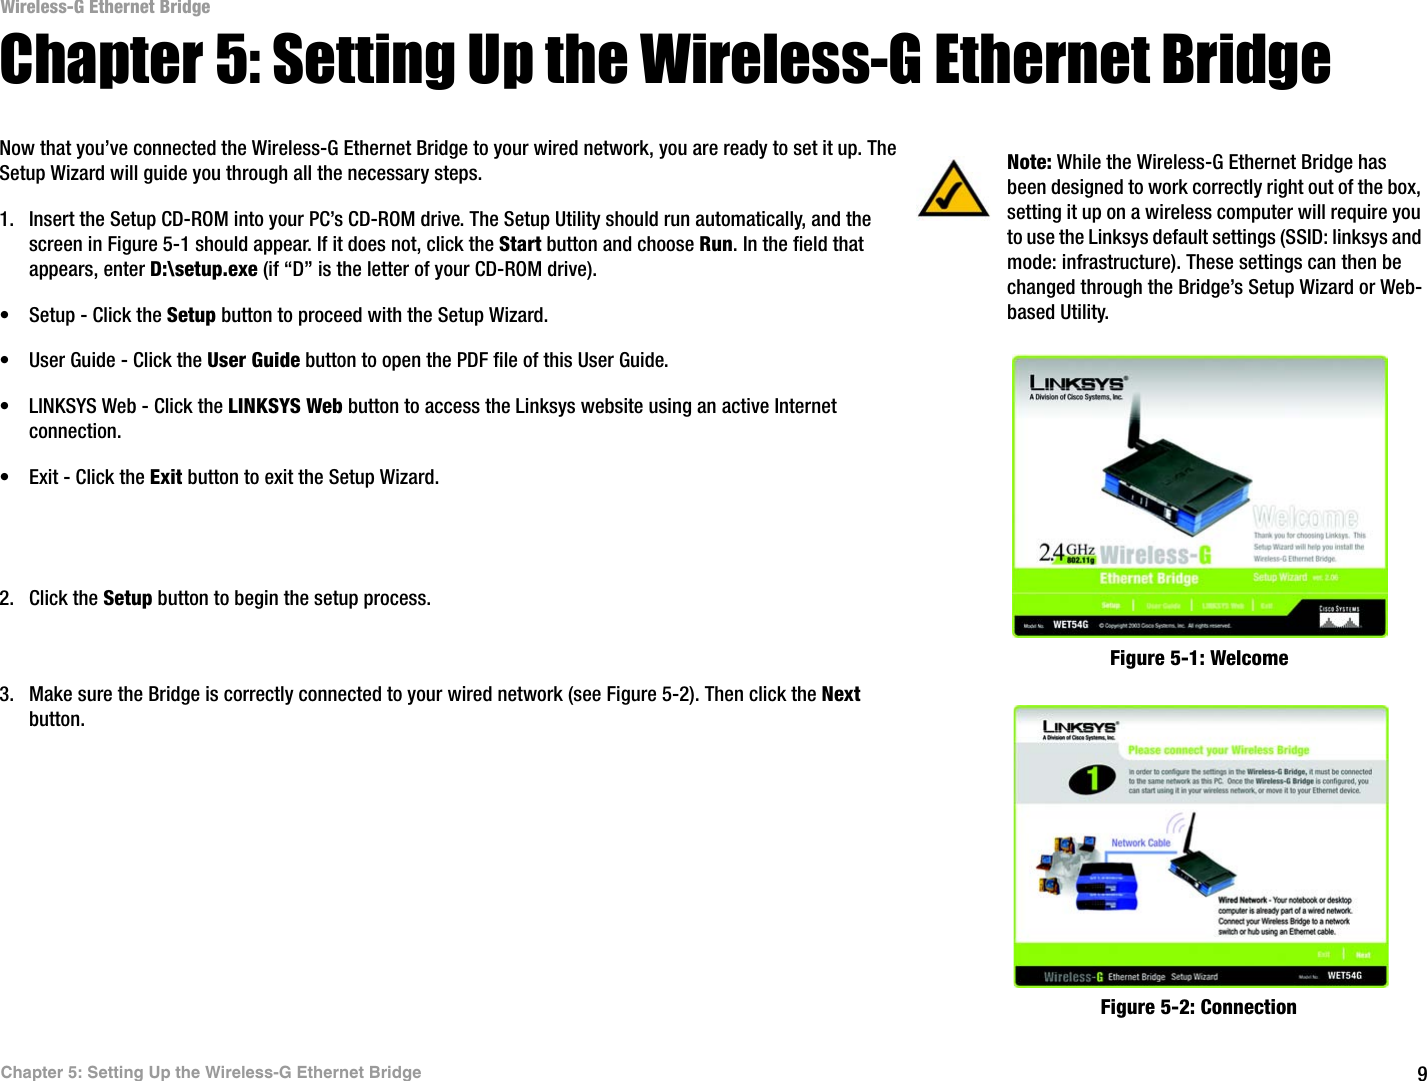 9Chapter 5: Setting Up the Wireless-G Ethernet BridgeWireless-G Ethernet BridgeChapter 5: Setting Up the Wireless-G Ethernet BridgeNow that you’ve connected the Wireless-G Ethernet Bridge to your wired network, you are ready to set it up. The Setup Wizard will guide you through all the necessary steps. 1. Insert the Setup CD-ROM into your PC’s CD-ROM drive. The Setup Utility should run automatically, and the screen in Figure 5-1 should appear. If it does not, click the Start button and choose Run. In the field that appears, enter D:\setup.exe (if “D” is the letter of your CD-ROM drive).• Setup - Click the Setup button to proceed with the Setup Wizard. • User Guide - Click the User Guide button to open the PDF file of this User Guide. • LINKSYS Web - Click the LINKSYS Web button to access the Linksys website using an active Internet connection.• Exit - Click the Exit button to exit the Setup Wizard.2. Click the Setup button to begin the setup process.3. Make sure the Bridge is correctly connected to your wired network (see Figure 5-2). Then click the Next button.Figure 5-2: ConnectionFigure 5-1: WelcomeNote: While the Wireless-G Ethernet Bridge has been designed to work correctly right out of the box, setting it up on a wireless computer will require you to use the Linksys default settings (SSID: linksys and mode: infrastructure). These settings can then be changed through the Bridge’s Setup Wizard or Web-based Utility.